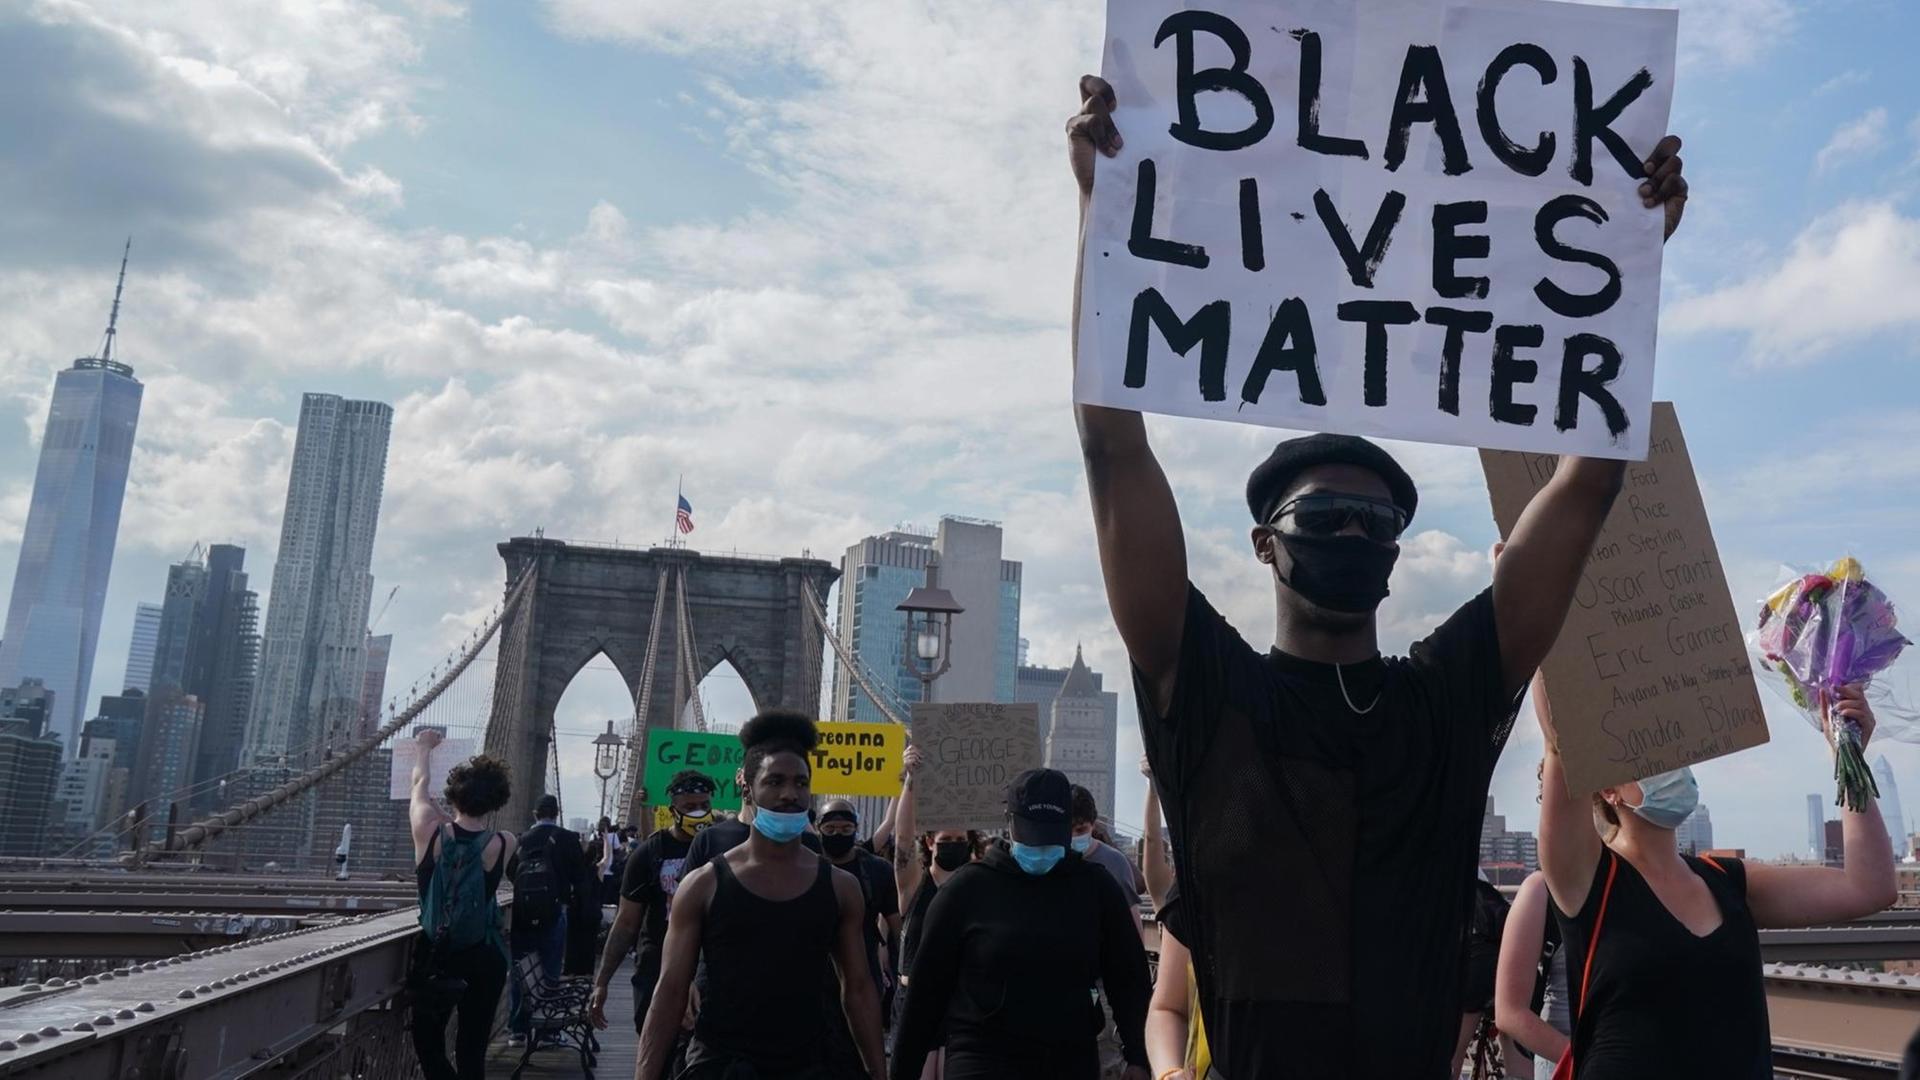 Protesters hold up signs as they demonstrate in outrage over the death of George Floyd by a Minneapolis police officer at a rally in lower Manhattan in New York, United States.